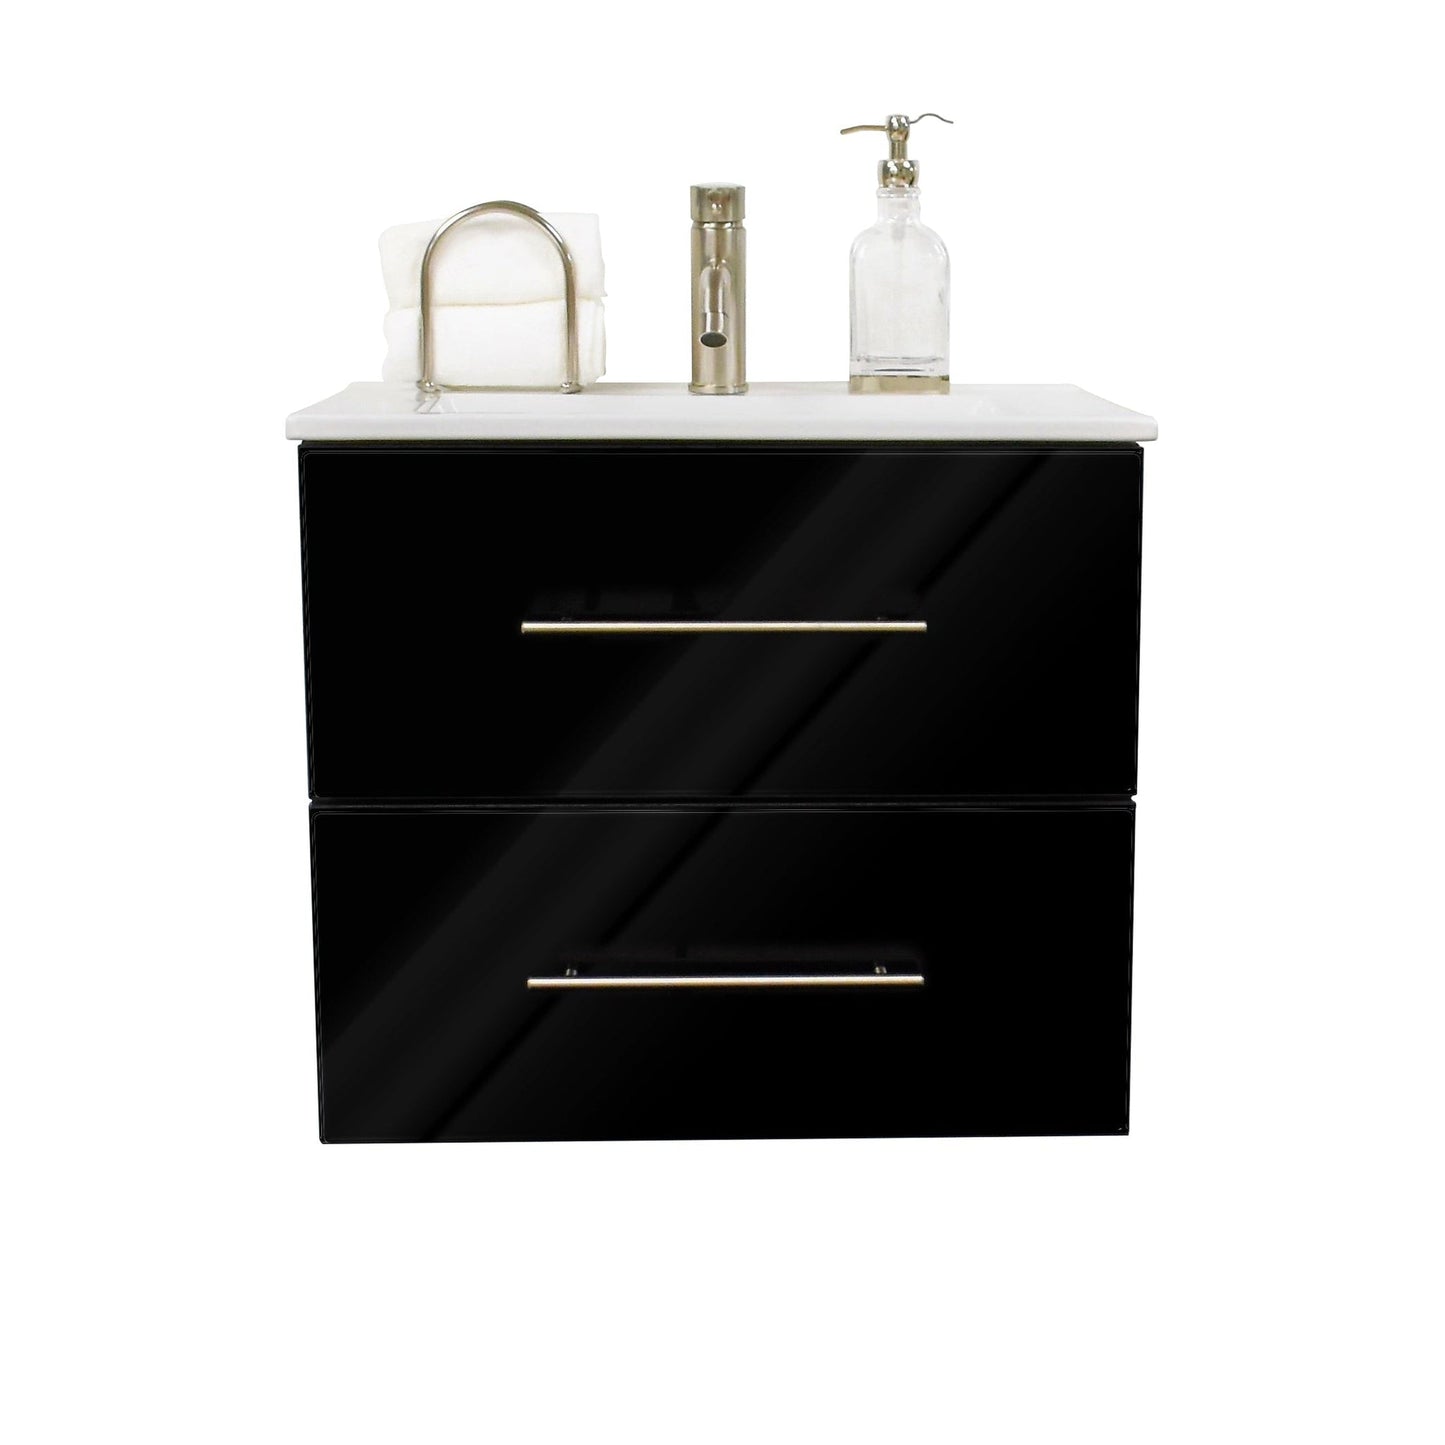 Volpa USA Napa 24" Glossy Black Wall-Mounted Floating Modern Bathroom Vanity With Integrated Ceramic Top and Satin Nickel Round Handles